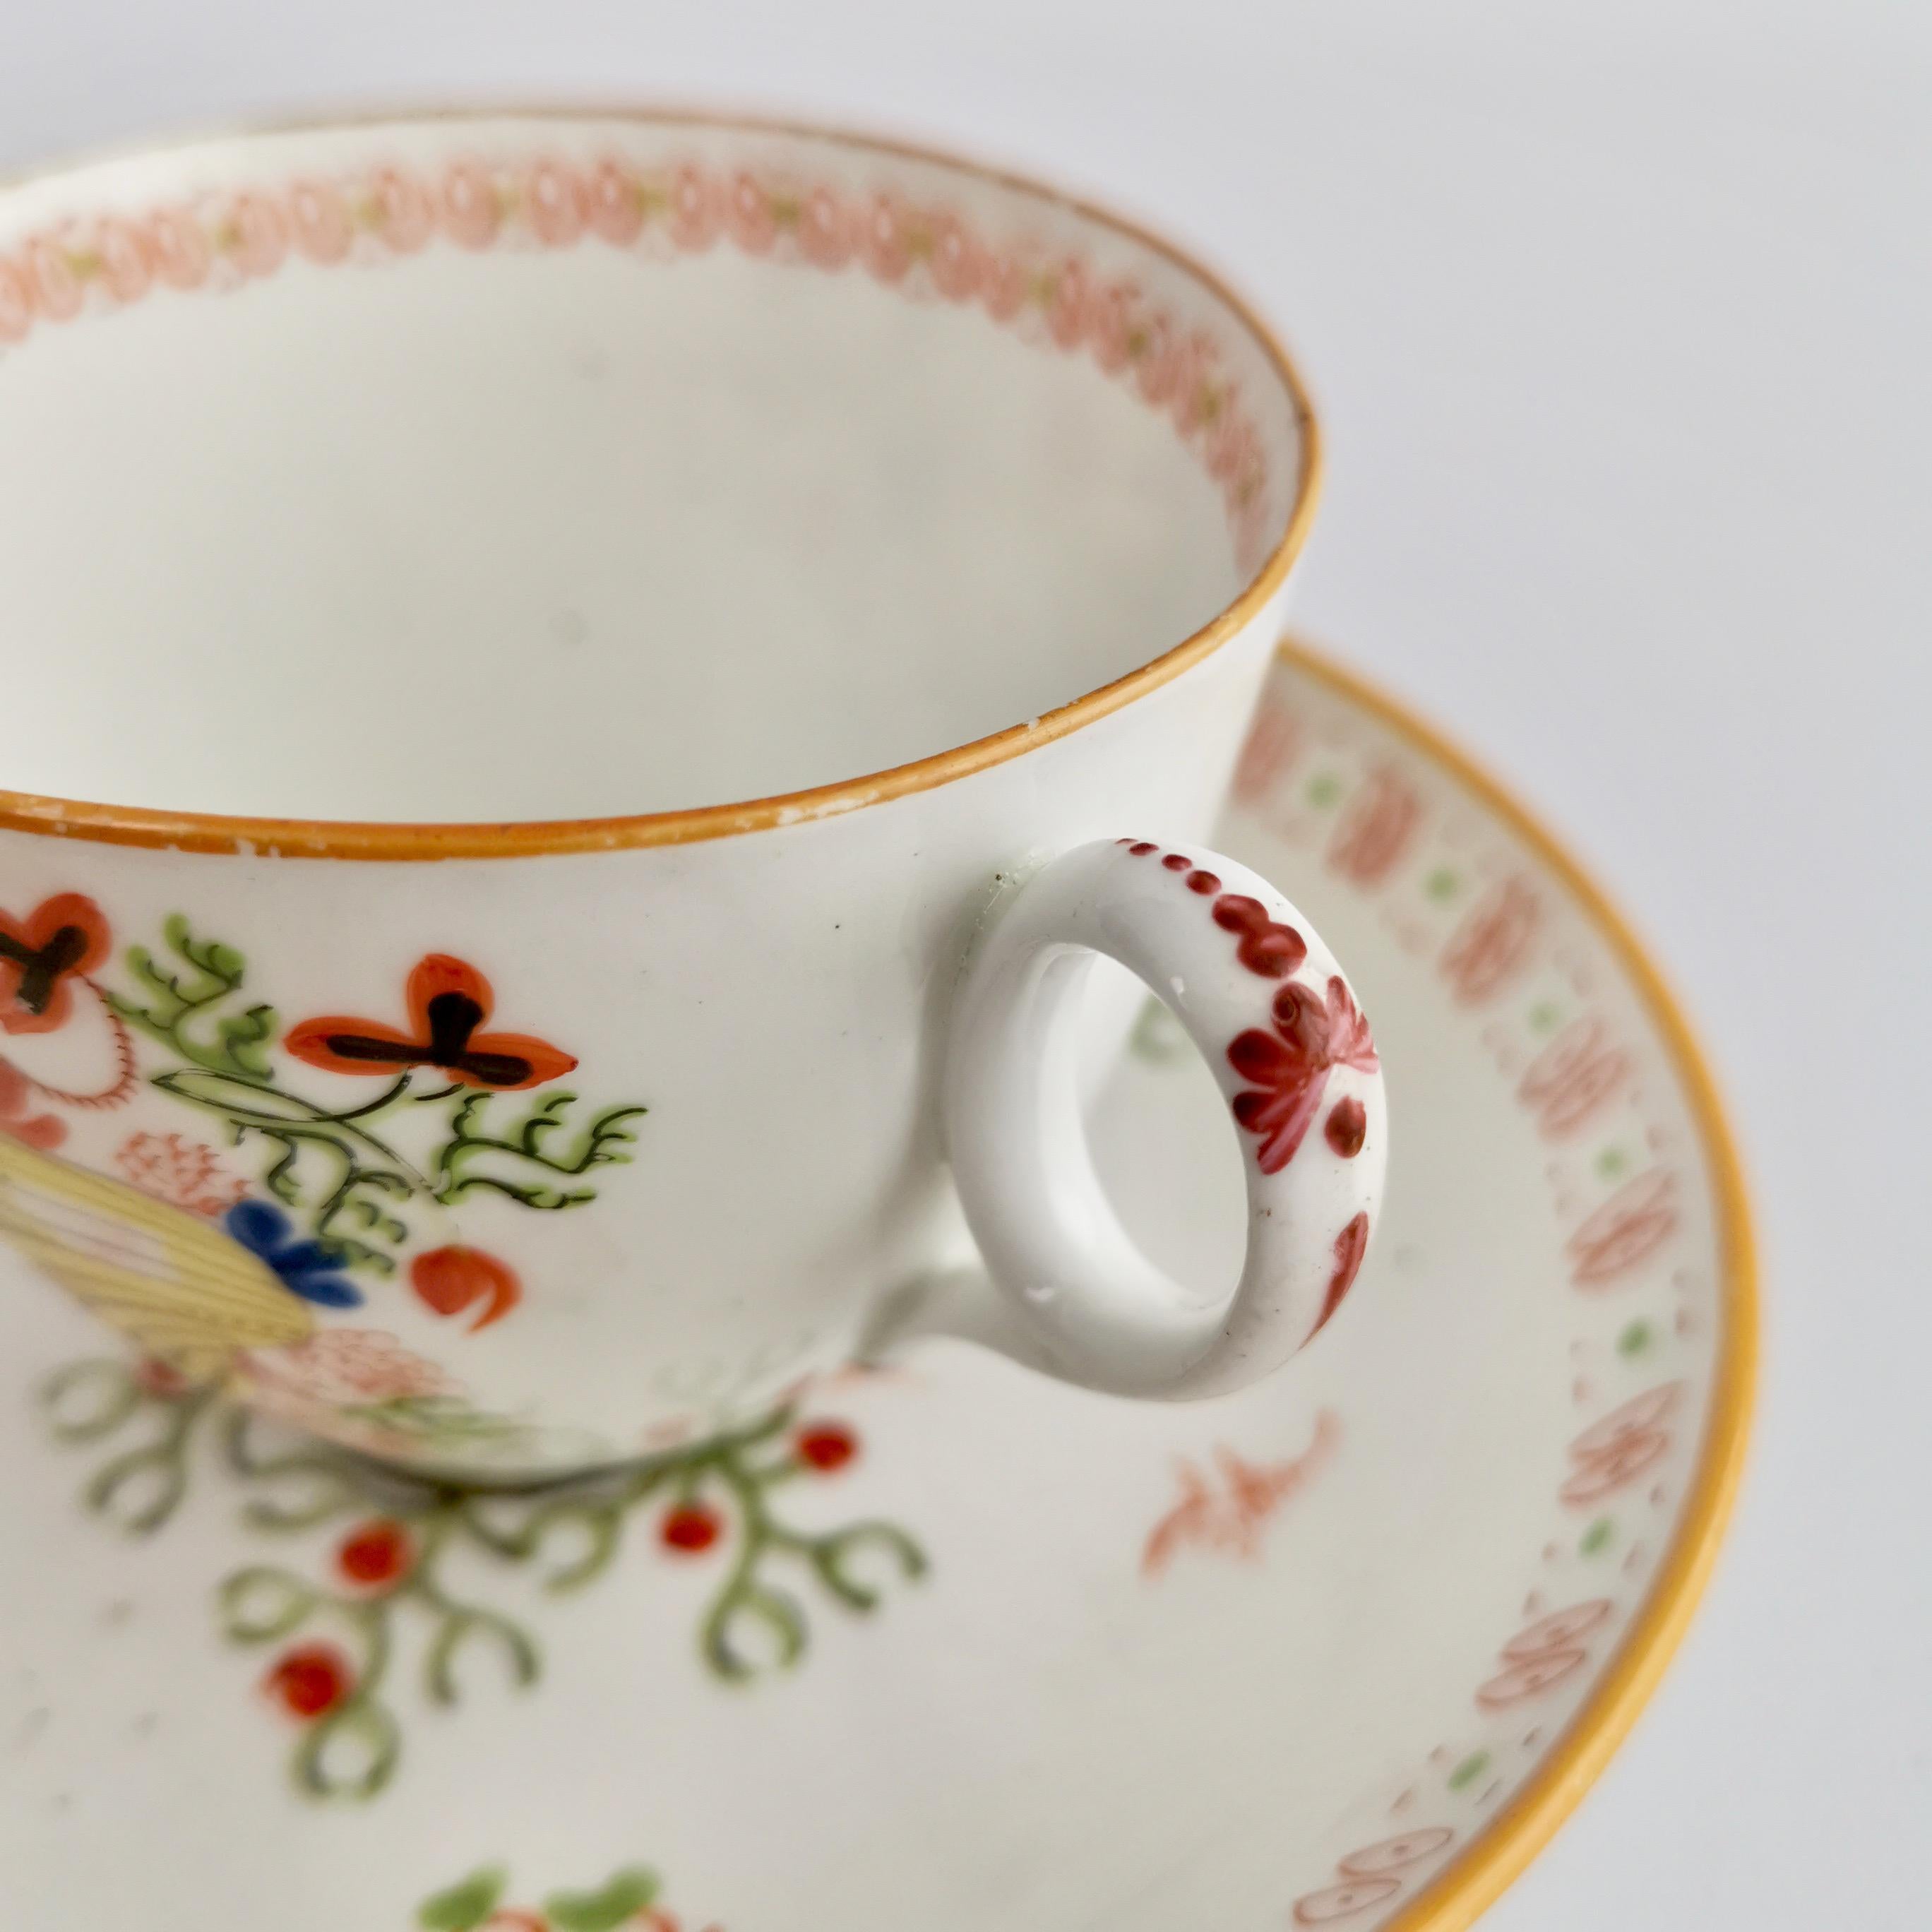 English New Hall Porcelain Teacup, Yellow Shell Pattern 1045, ca 1810